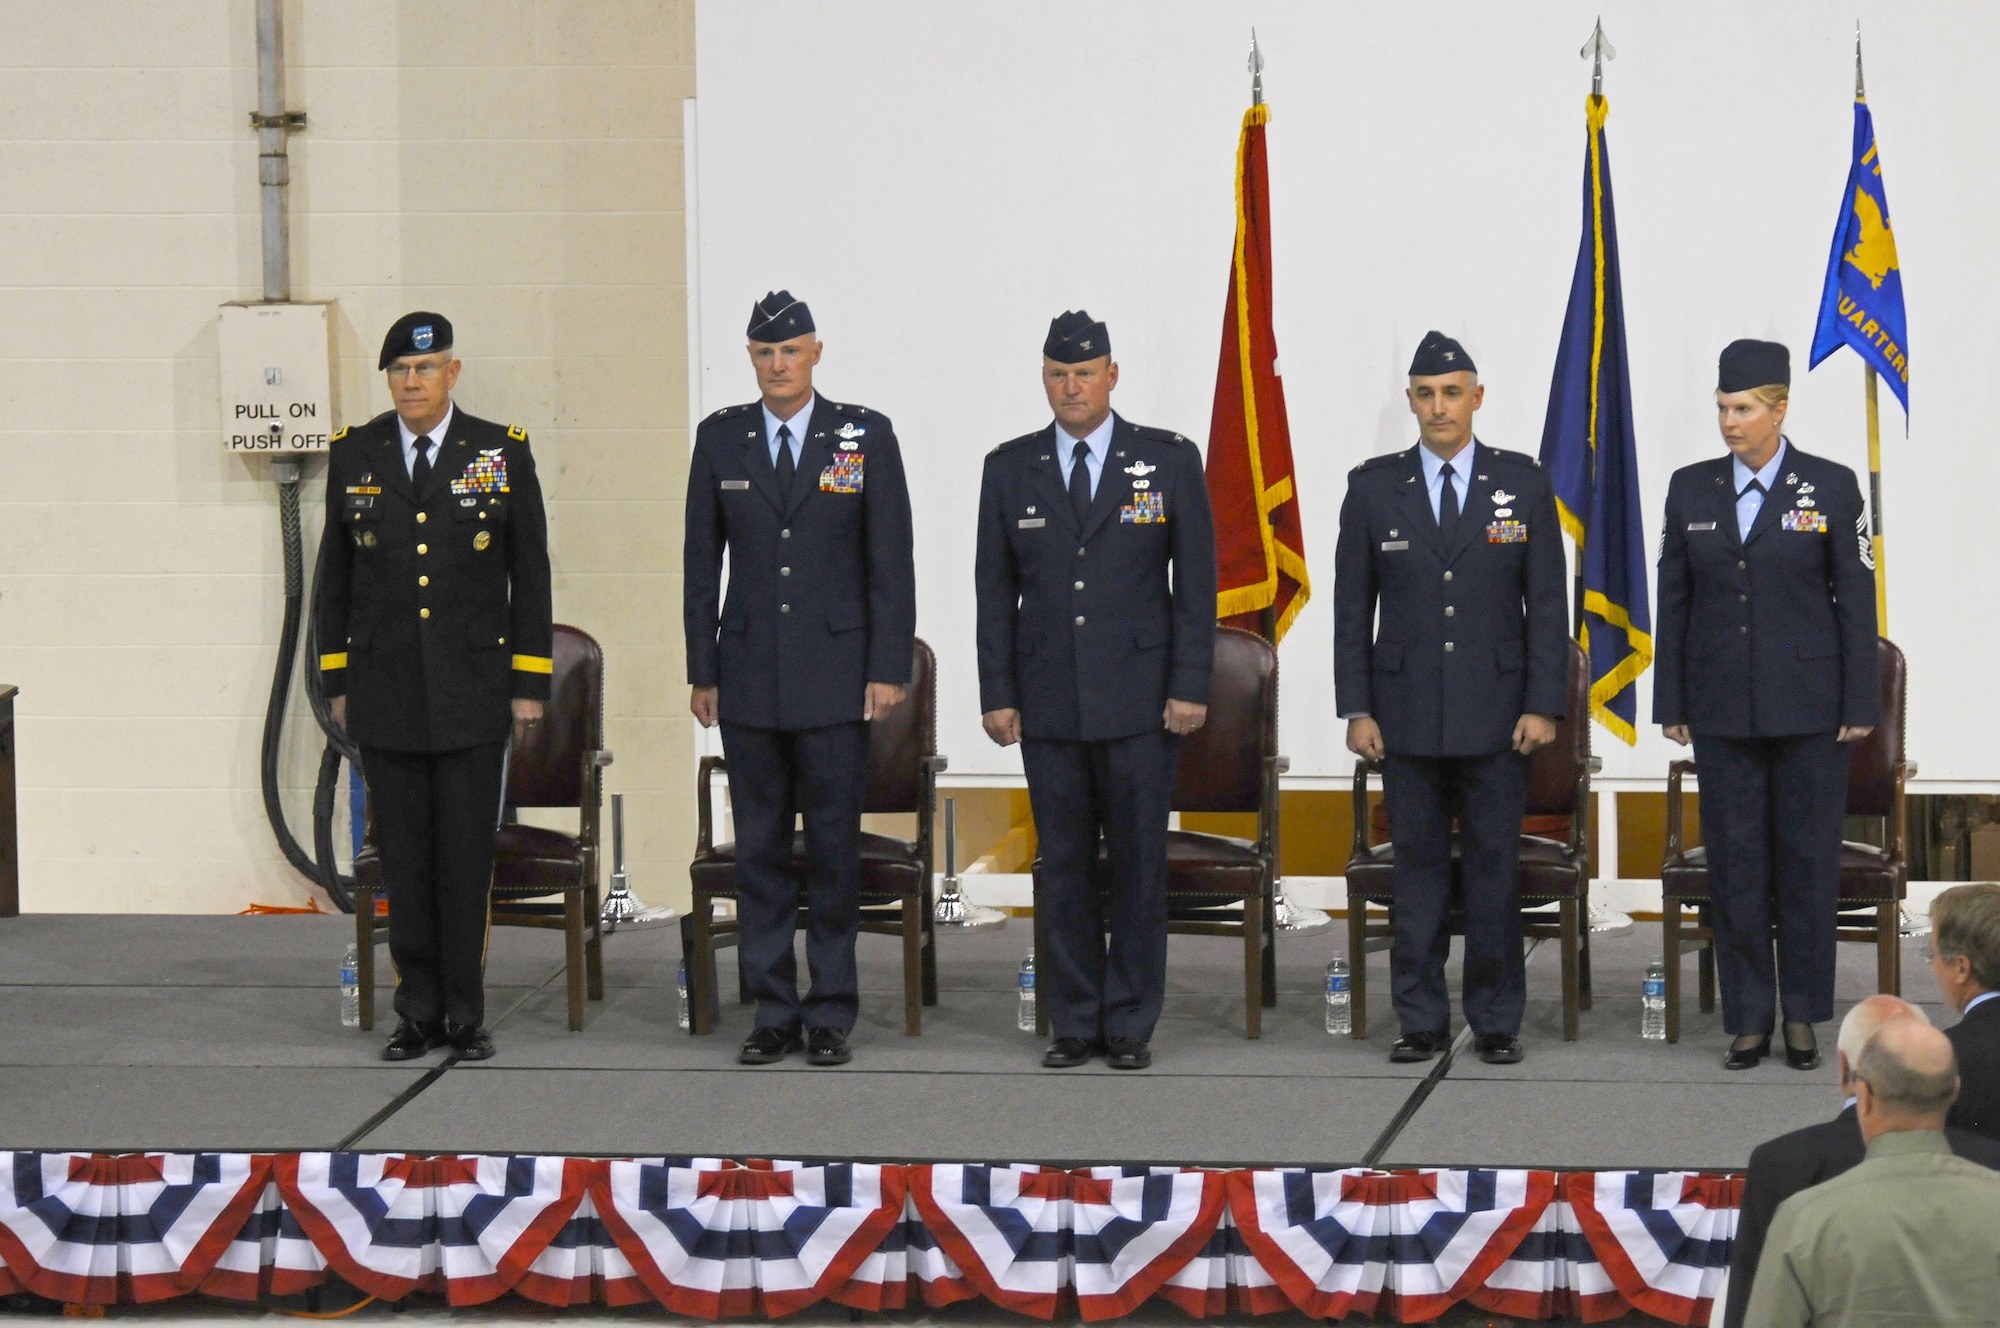 Col. Jeffrey Silver (right of center) stands ready to assume command of the 173rd Fighter Wing during a change of command ceremony Sept. 11, 2011. Brig. Gen. Steven D. Gregg (left of center), commander of the Oregon Air National Guard officiated the passing of the wing guidon to Silver after Col. James Miller (center), the outgoing commander relinquished it. Maj. Gen. Raymond F. Rees, The Adjutant General, Oregon stands at the far left. Silver joined the wing in June from the 142nd Fighter Wing in Portland, as the vice commander. (U.S. National Guard photo by Amn. Basic Penny Hamilton) RELEASED